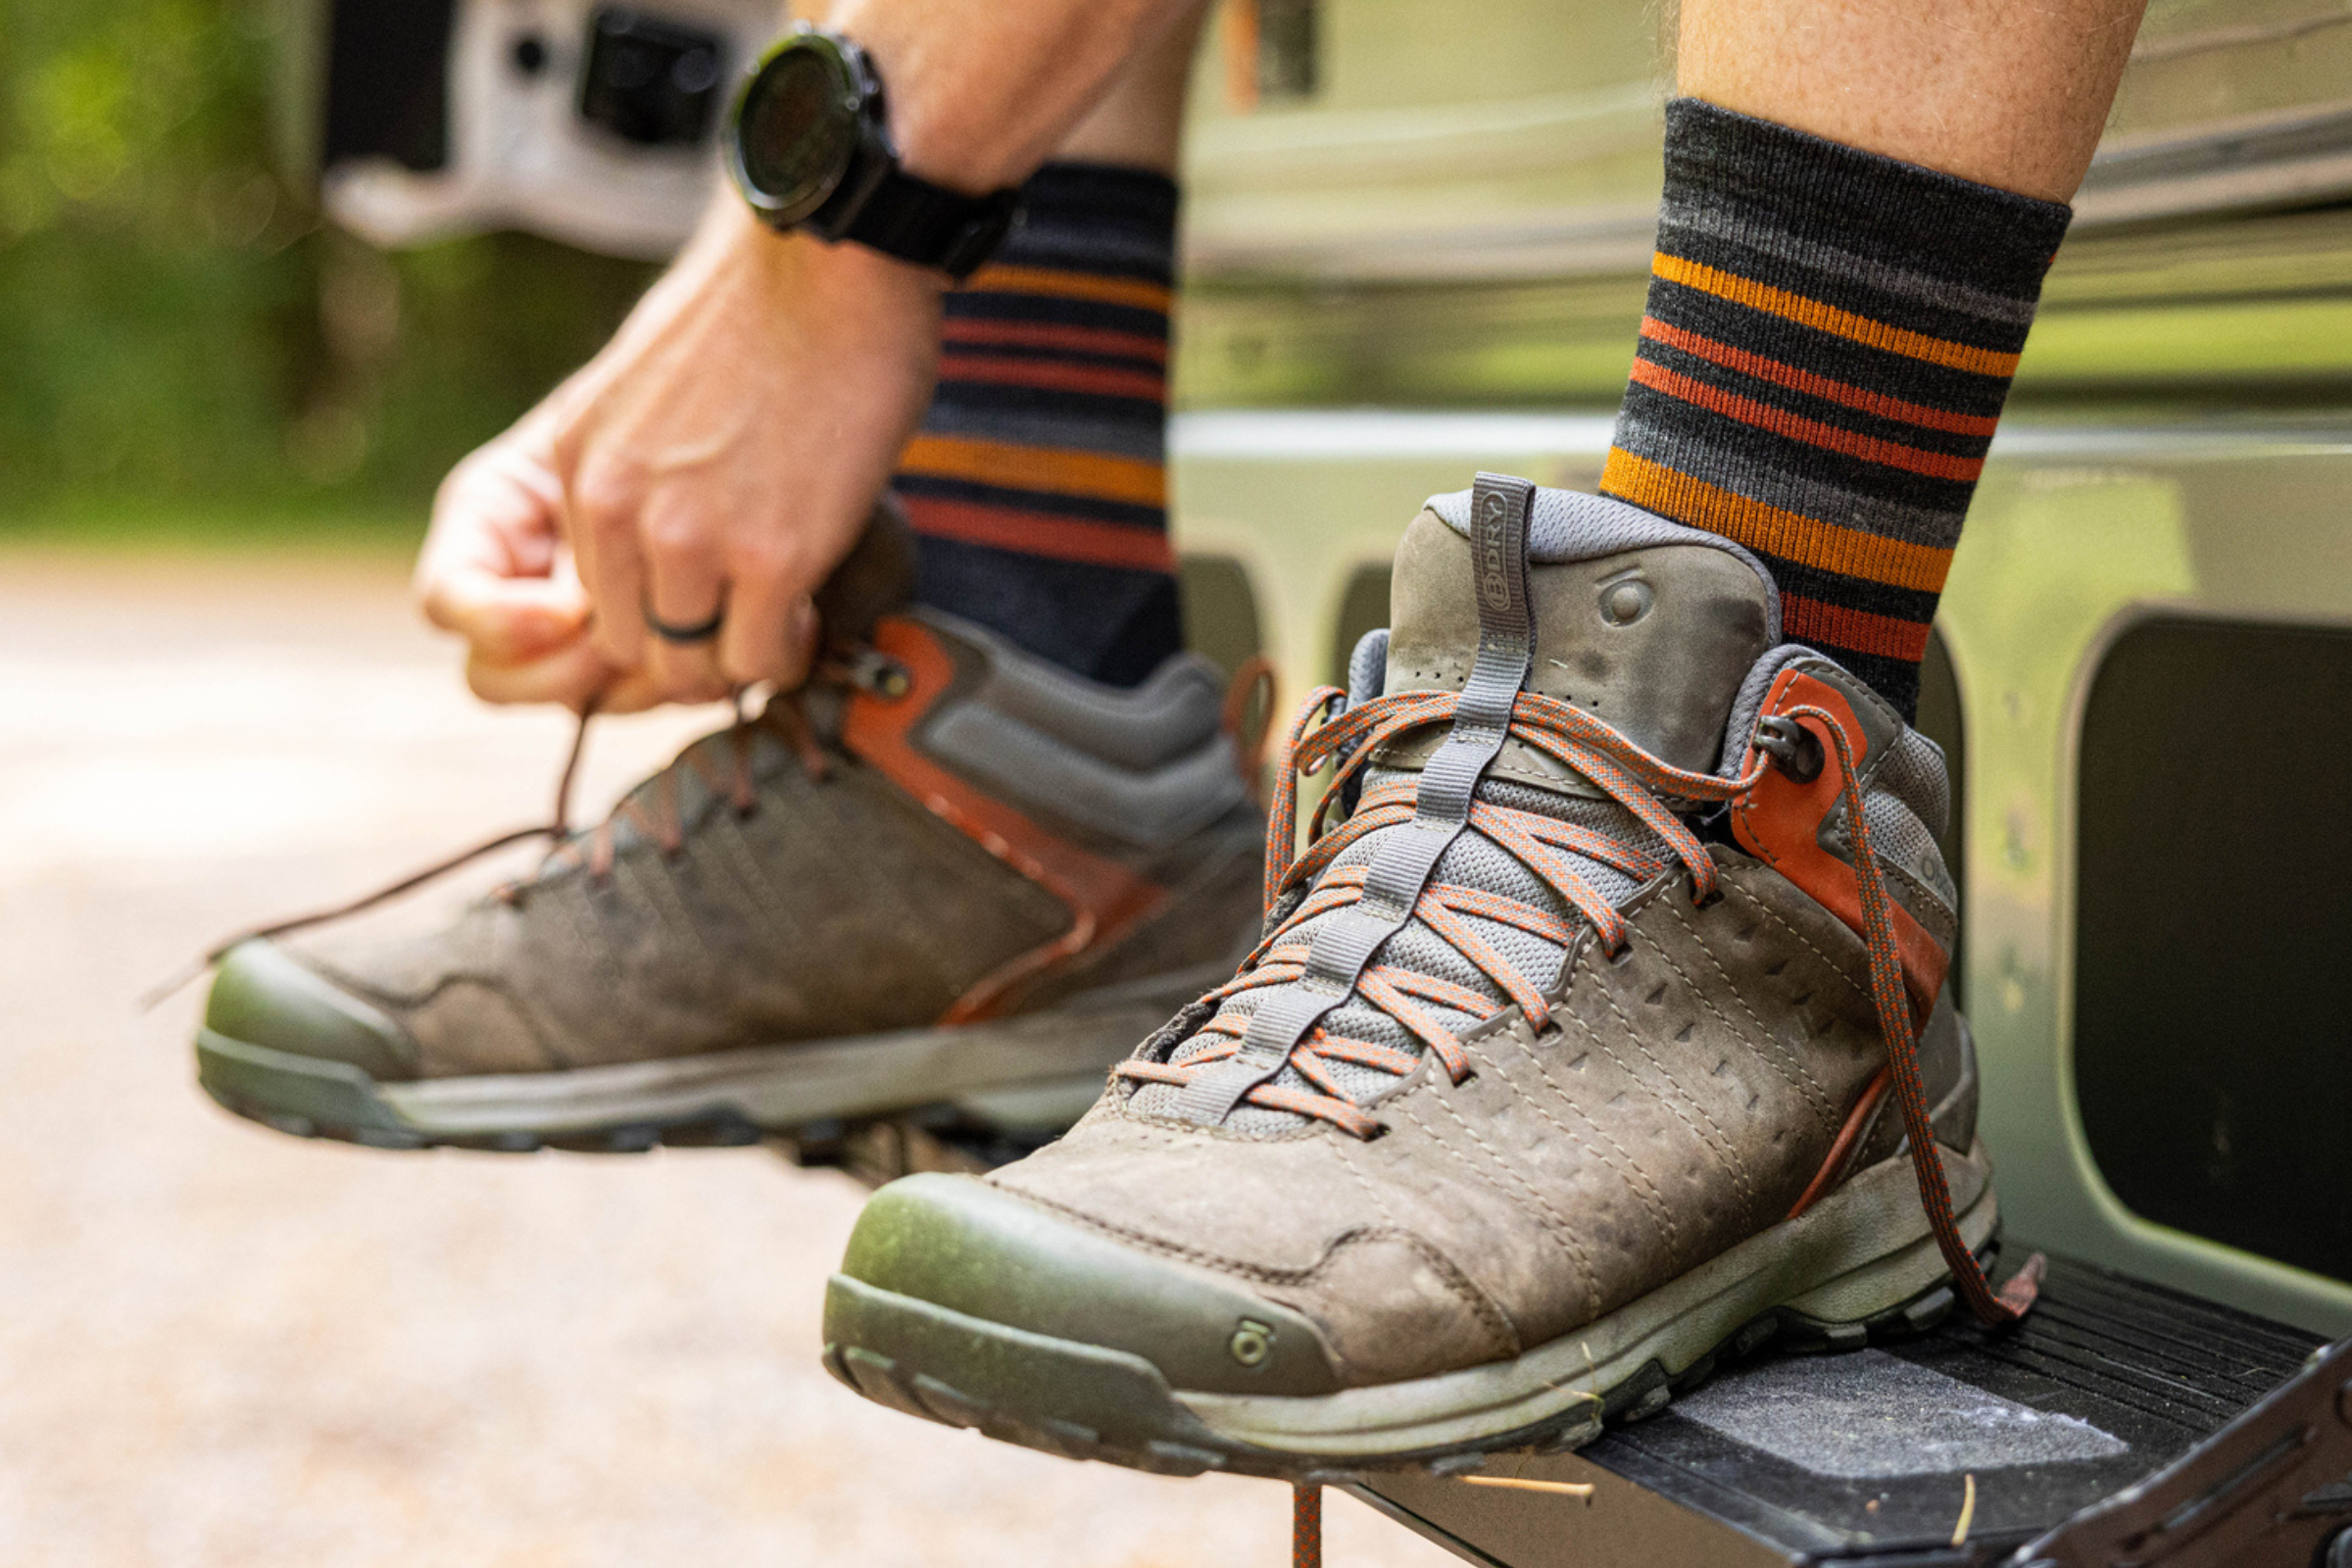 Fastpack Micro Crew socks from Darn Tough